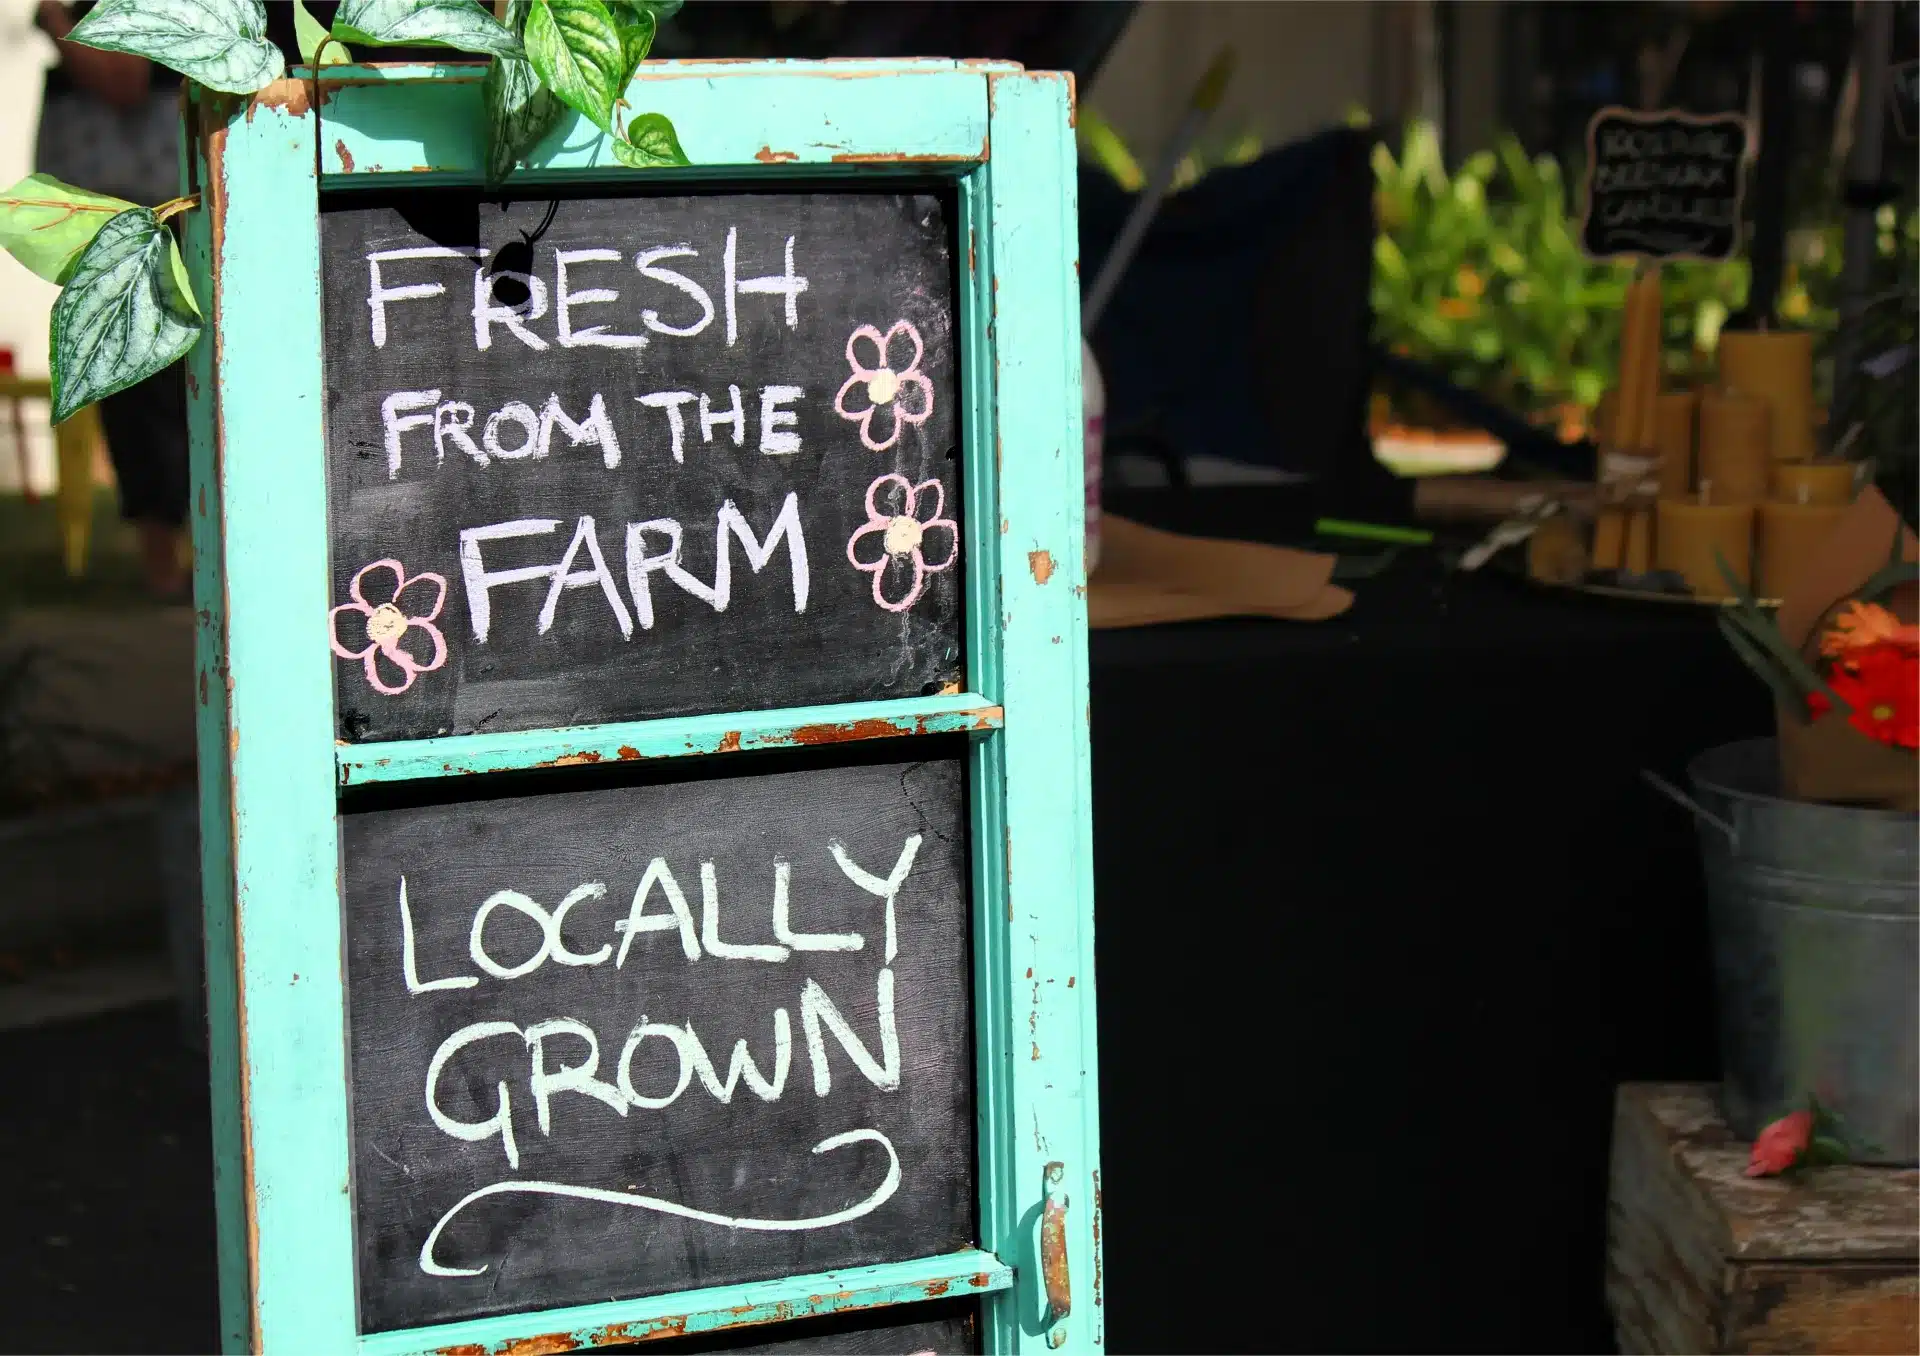 How to Attract More Customers with Local Business Listings to grow your business? - A Locally grown sign